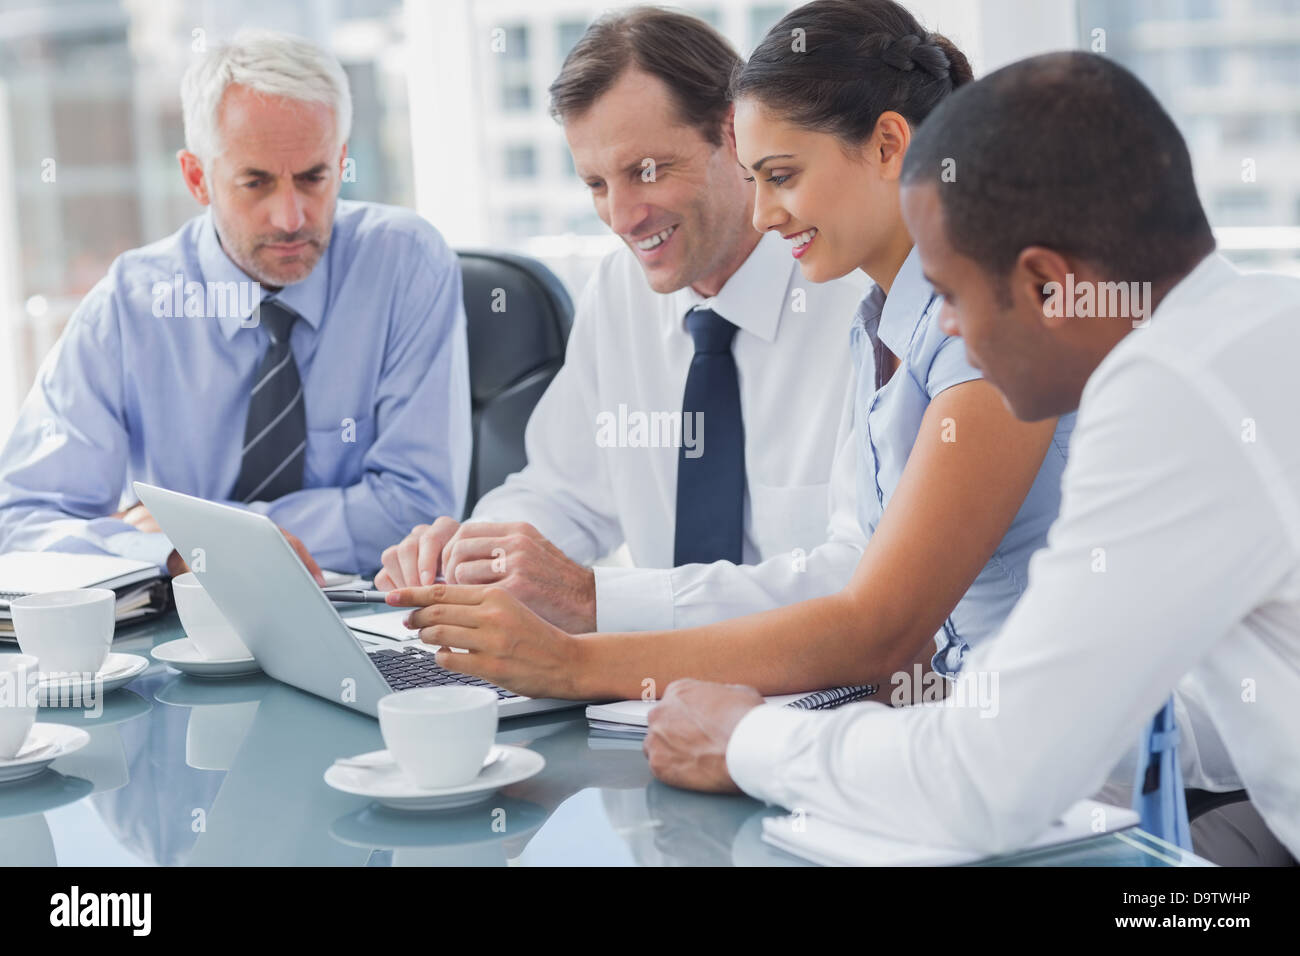 Business people looking at a laptop Stock Photo